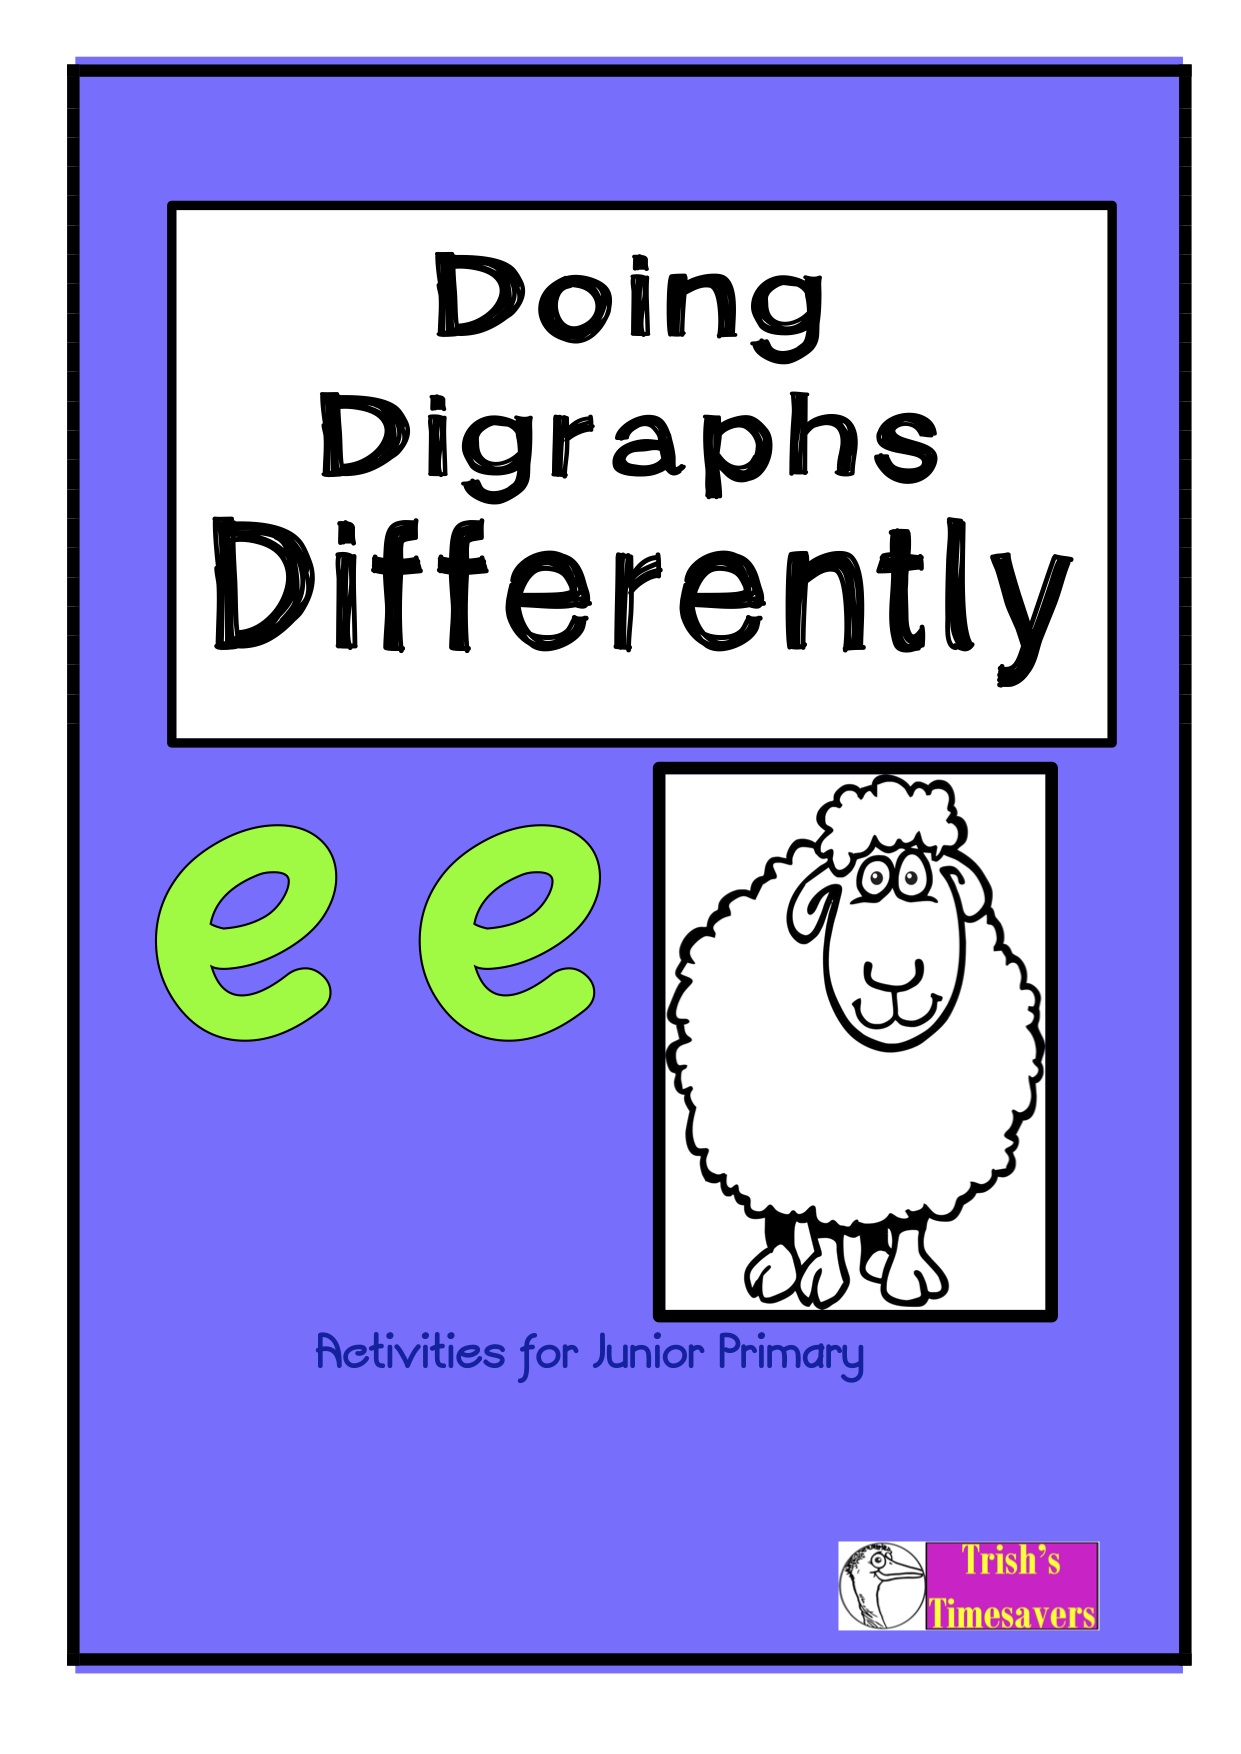 Doing Digraphs Differently - ee